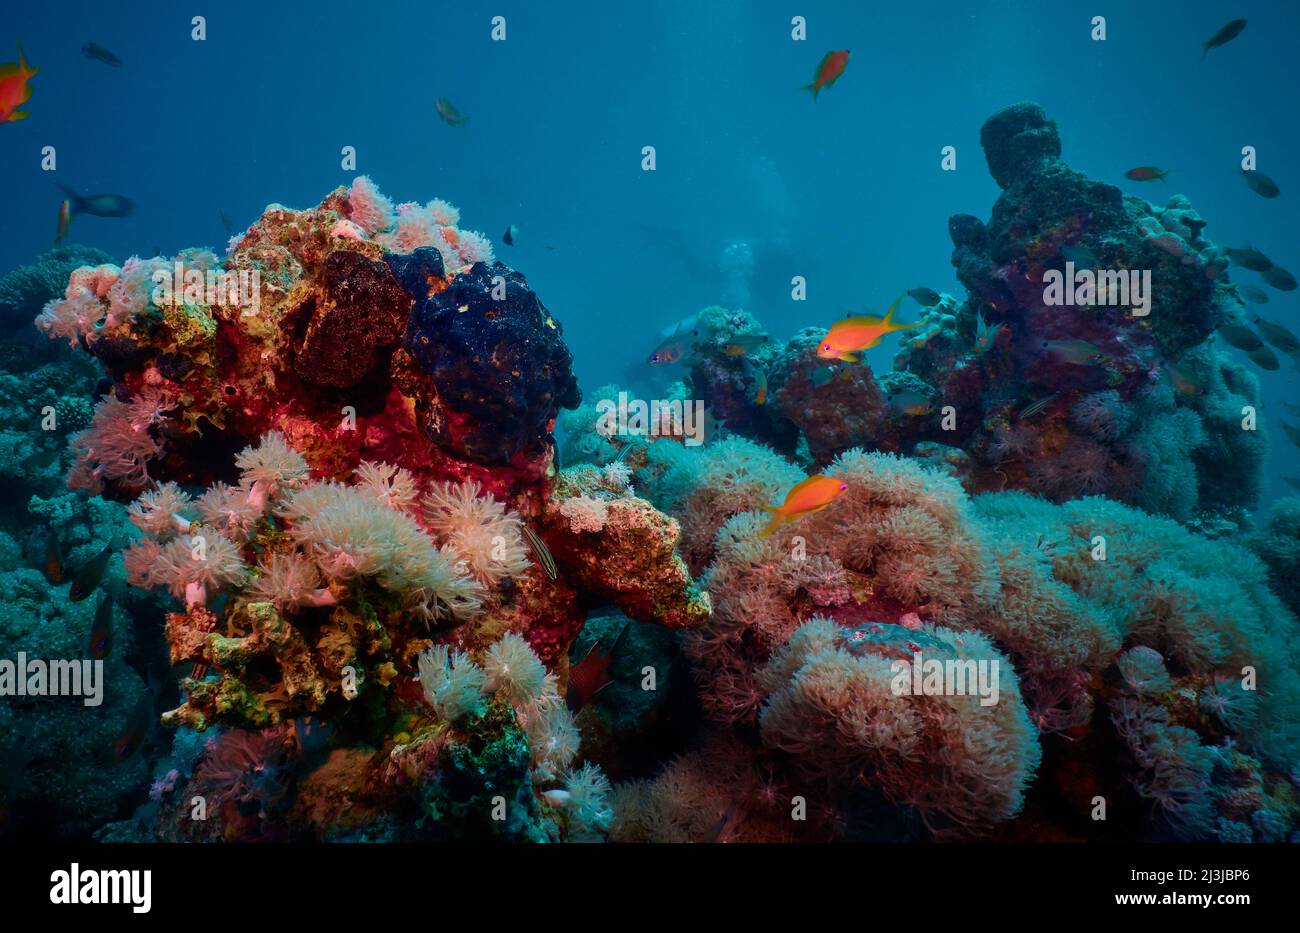 Scuba diving in the Red Sea, Makadi Bay, North Africa, Coral Reef with swarm of fishes, Stock Photo